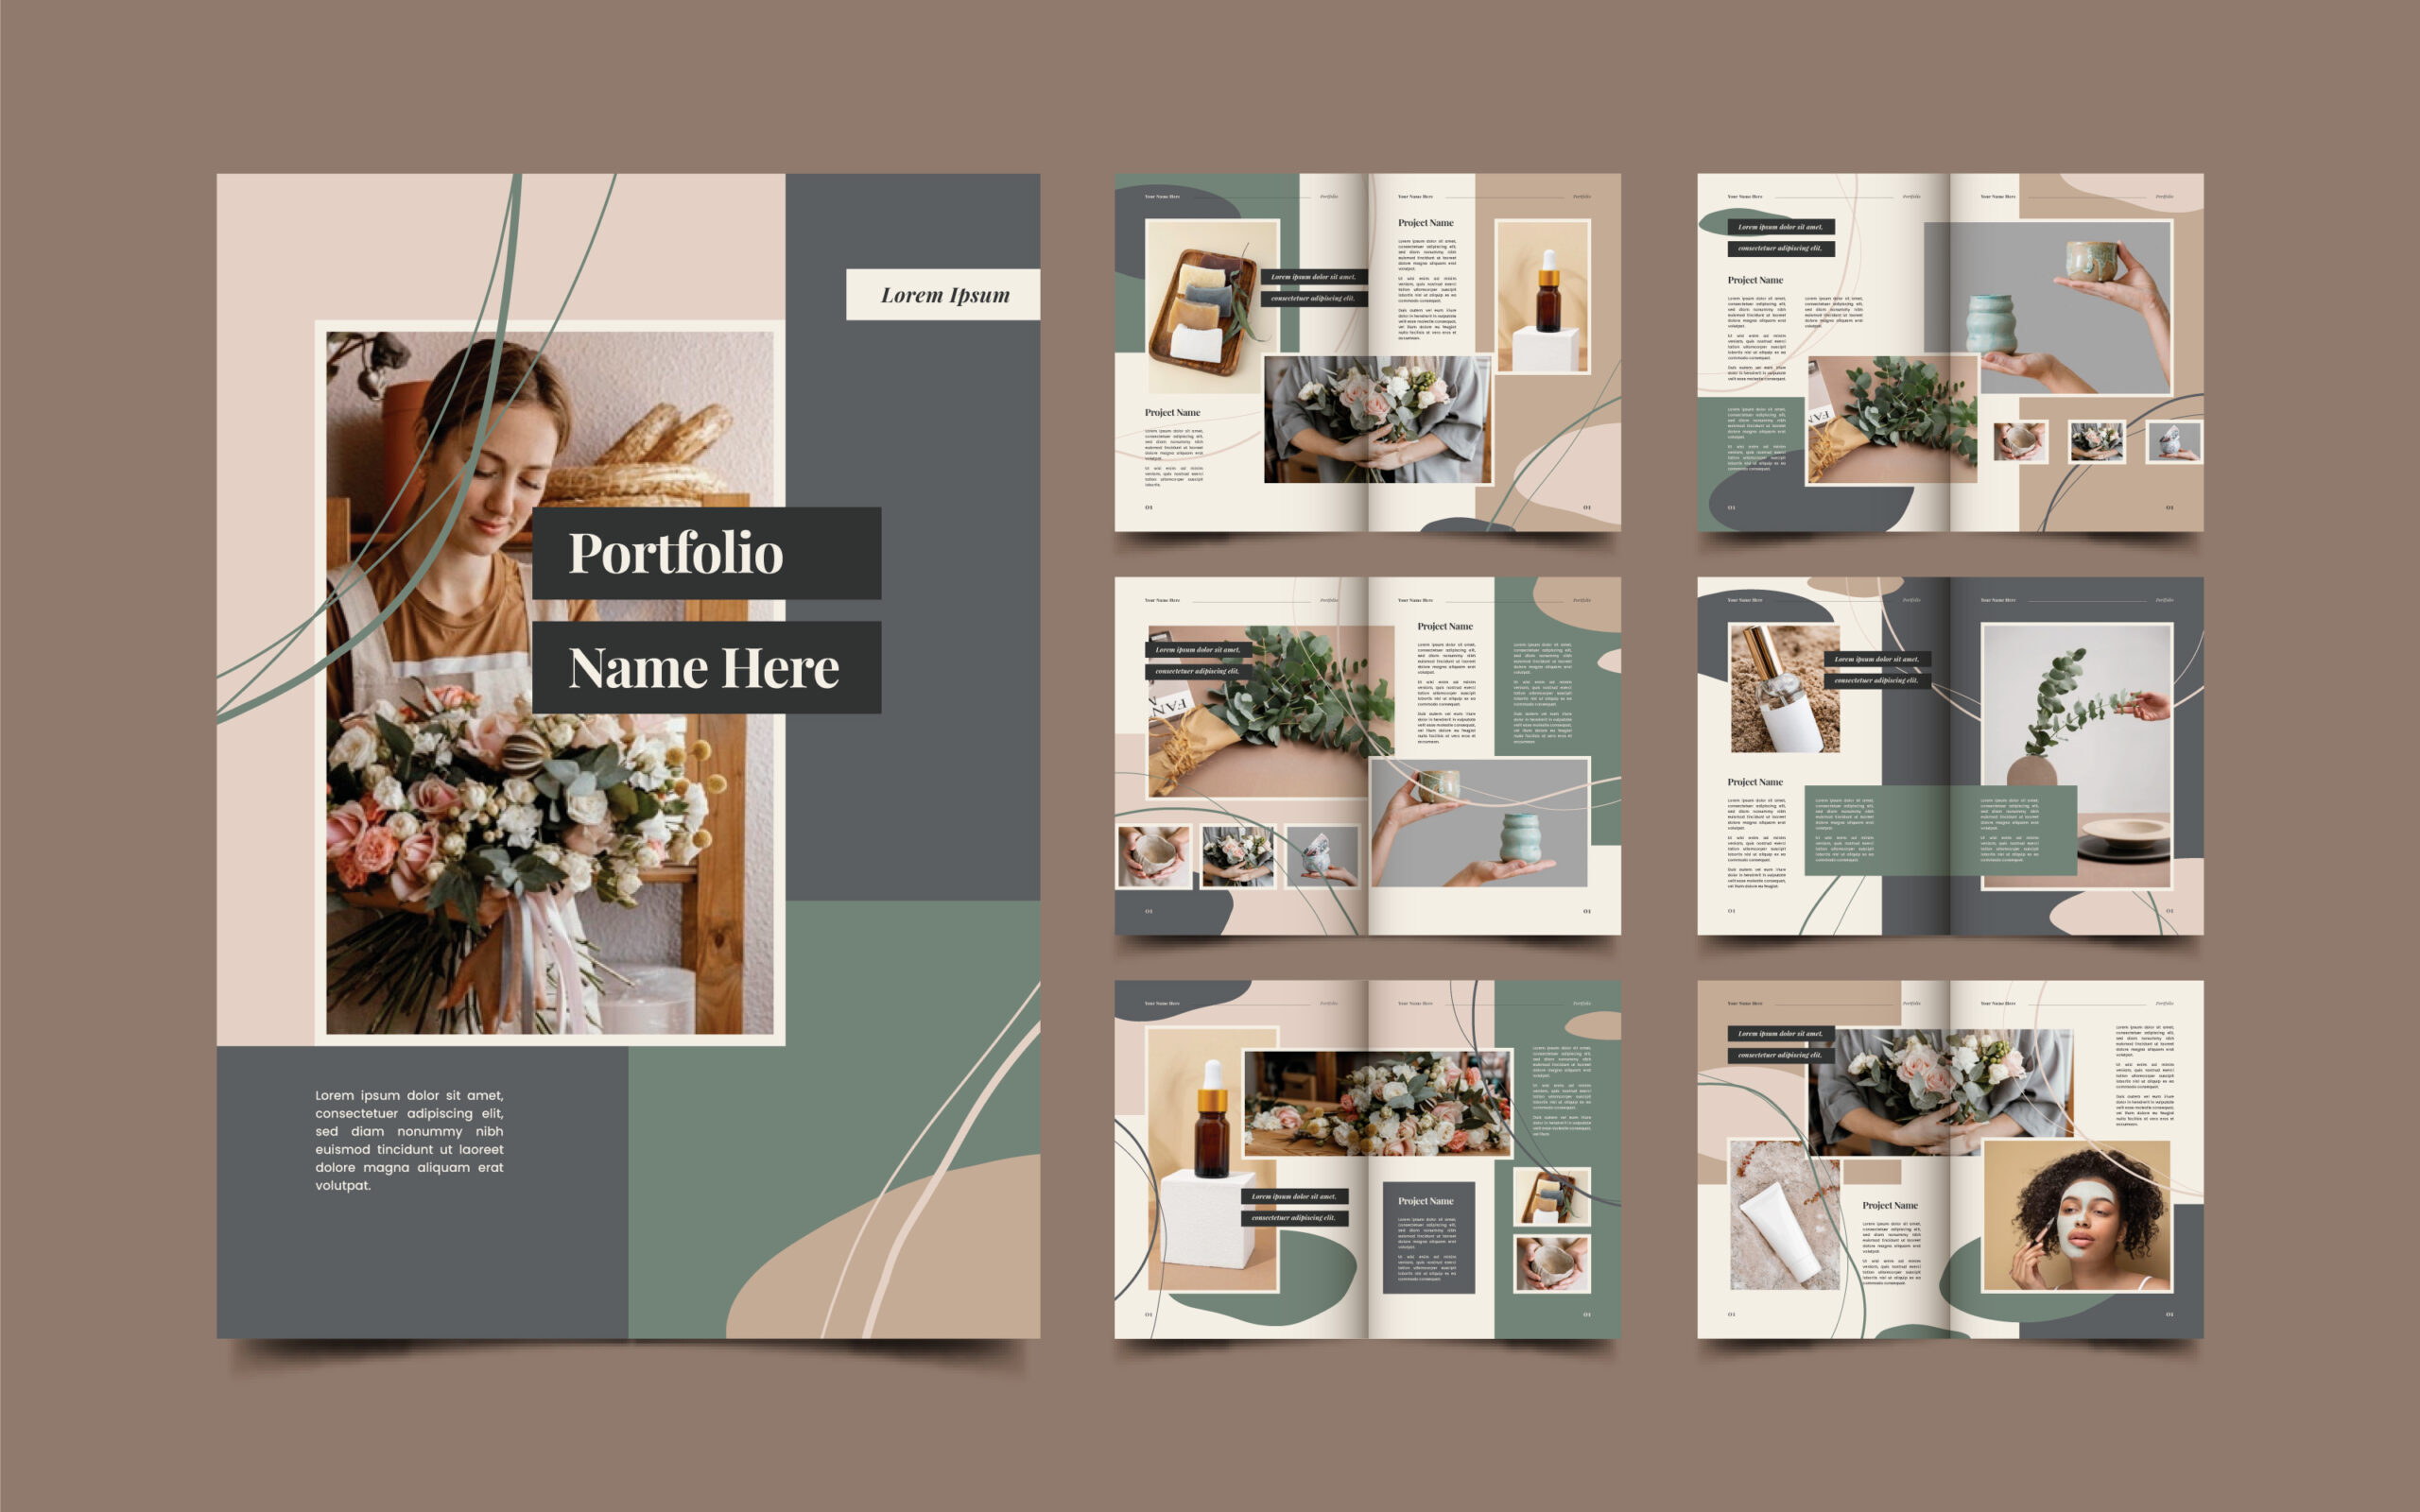 Get Started as a Hairstylist Why You Need a Hairstylist Portfolio (2) hairstylist portfolio - Get Started as a Hairstylist Why You Need a Hairstylist Portfolio 2 scaled - Get Started as a Hairstylist: Why You Need a Hairstylist Portfolio